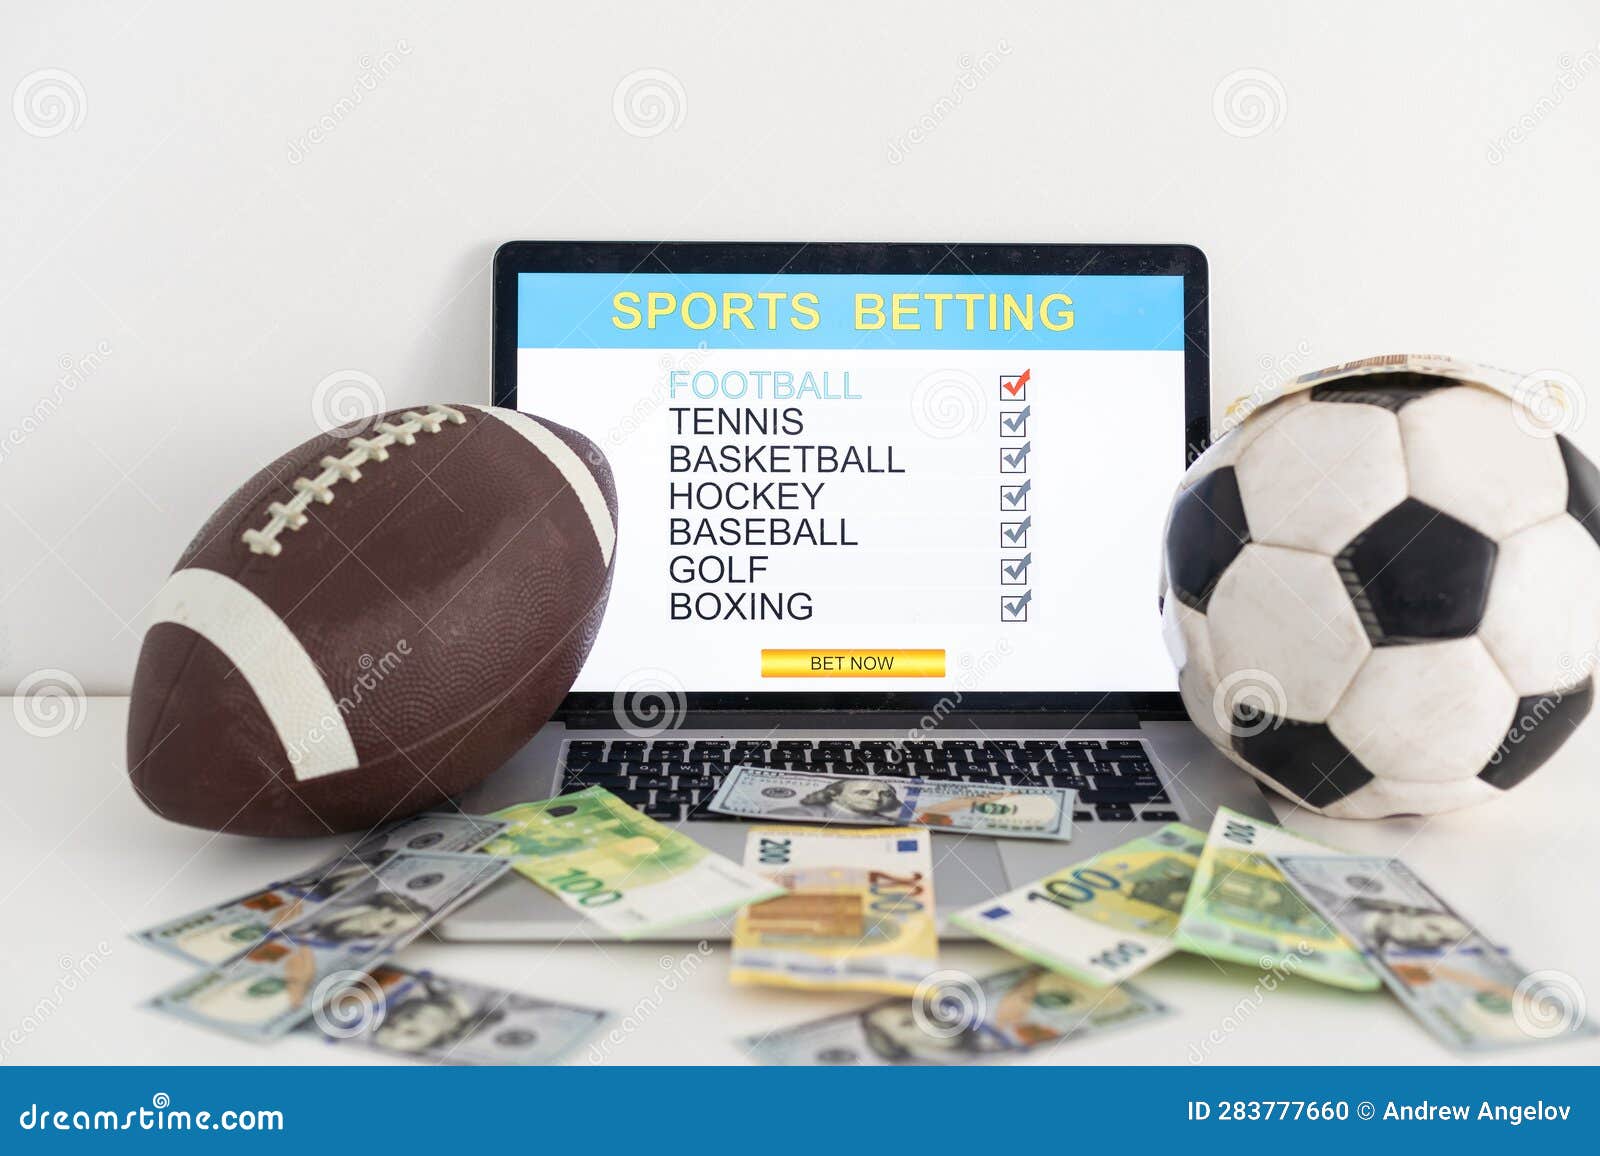 Betting Bet Sport Phone Gamble Laptop Over Shoulder Soccer Live Home Website Concept - Stock Image Stock Photo